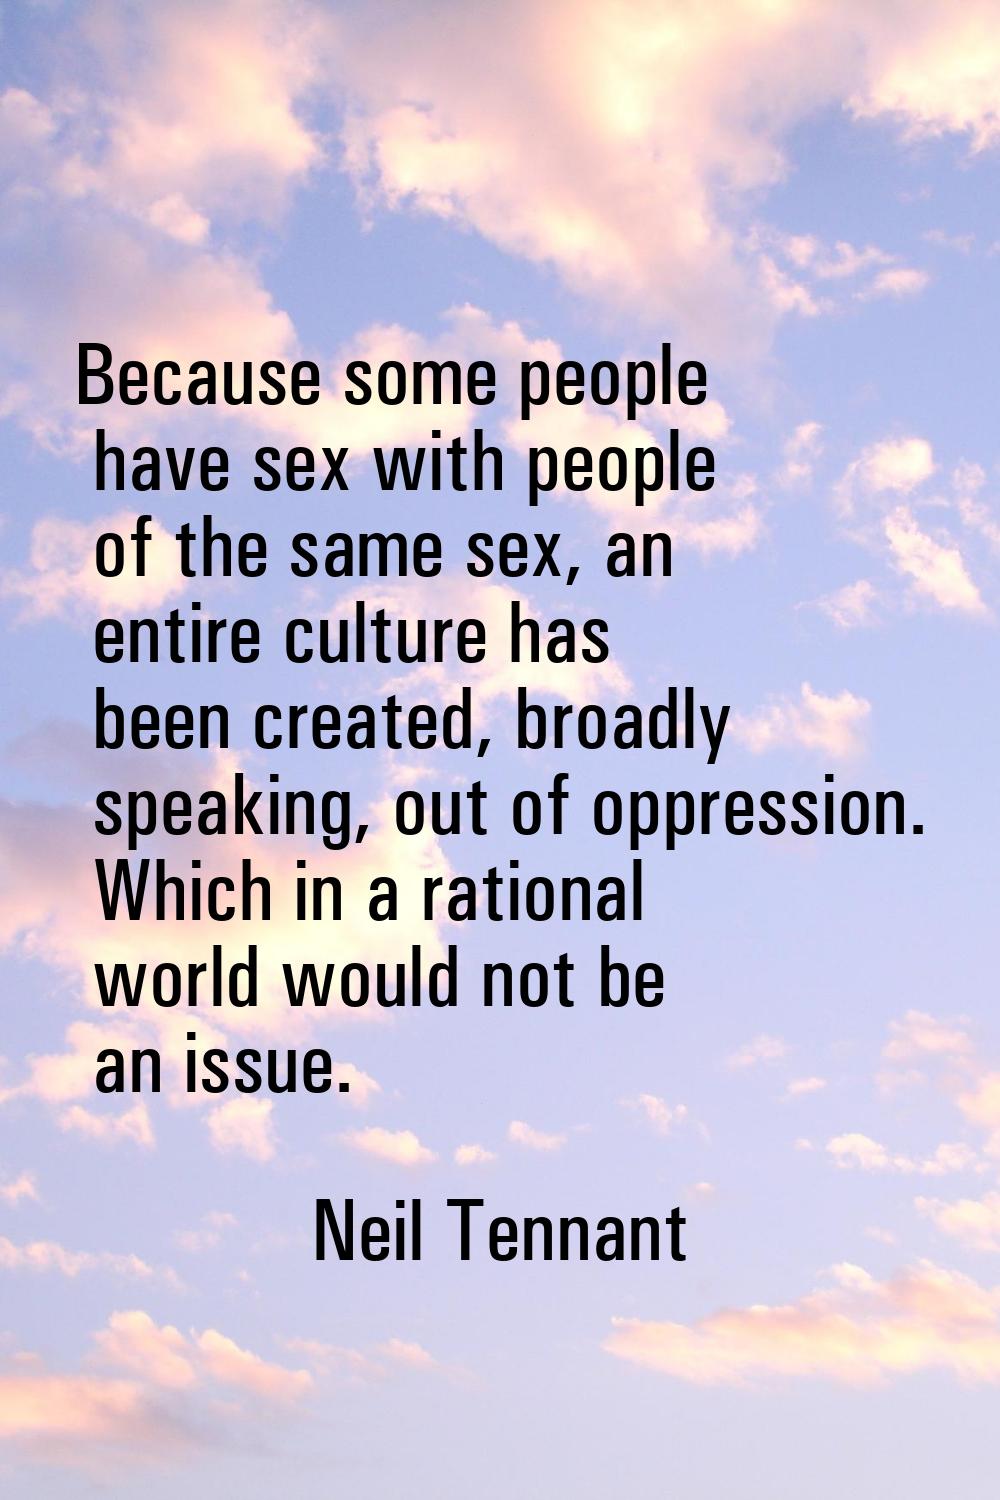 Because some people have sex with people of the same sex, an entire culture has been created, broad